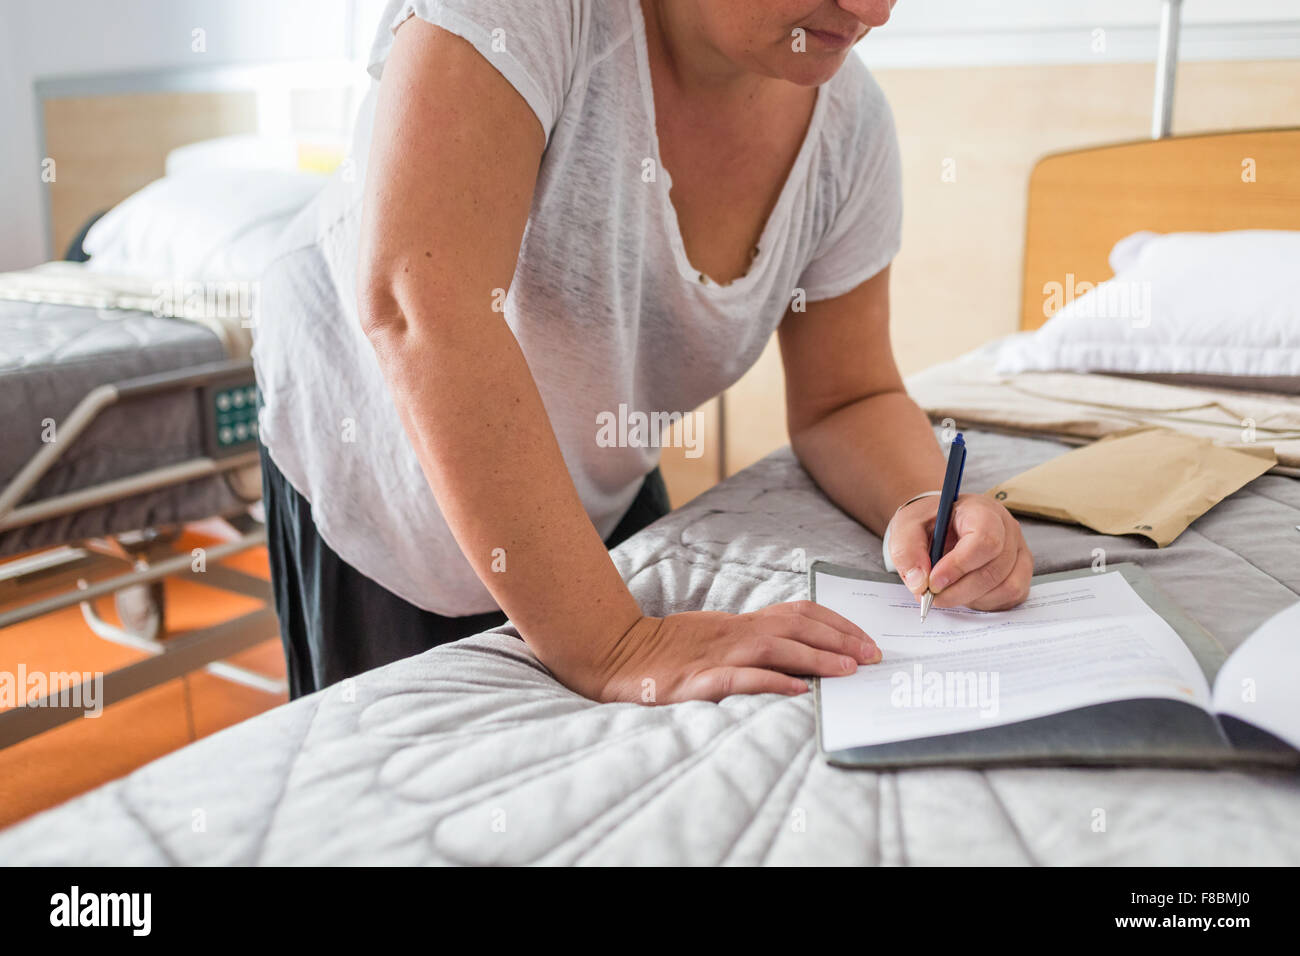 Female patient signing medical forms before surgery. Stock Photo